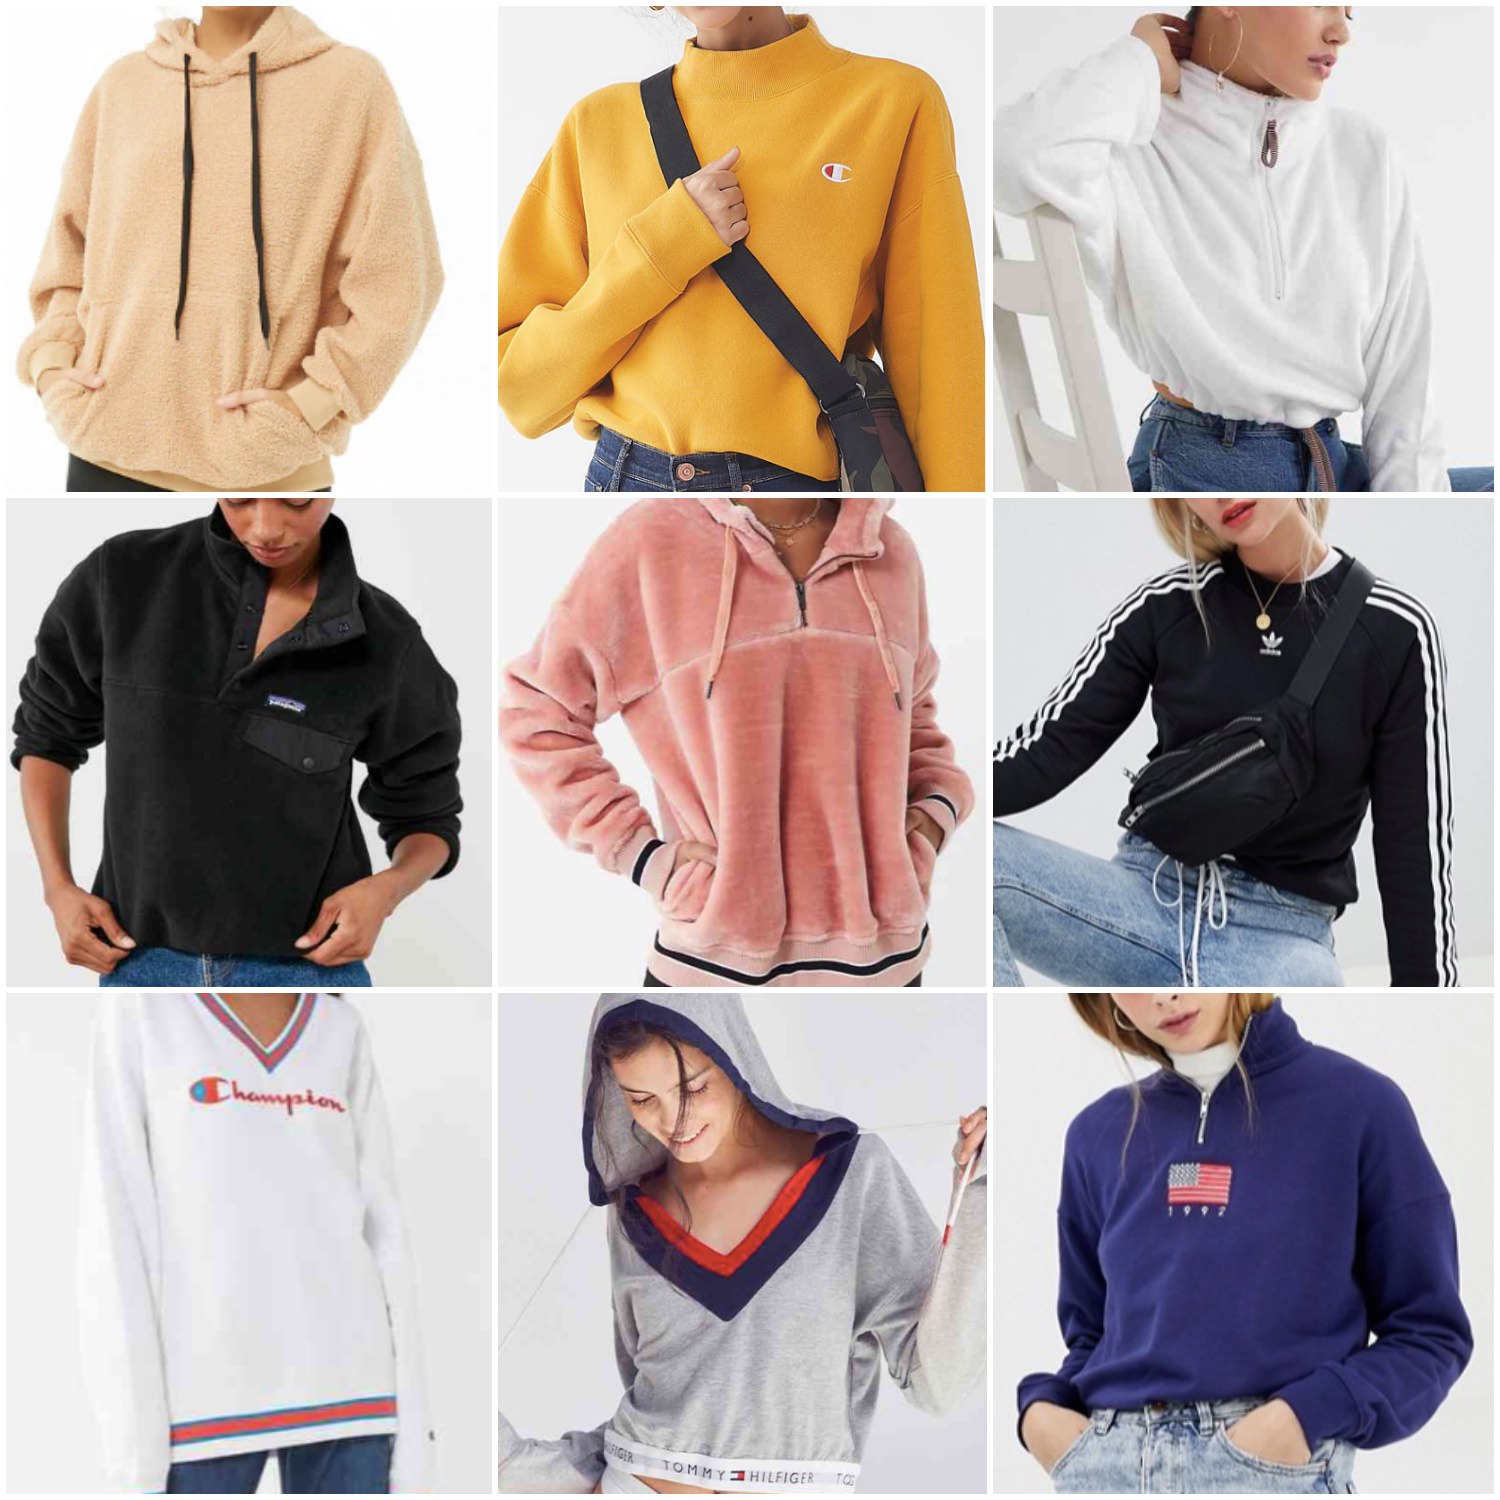 So Many Sweatshirts and Hoodies | Truffles and Trends